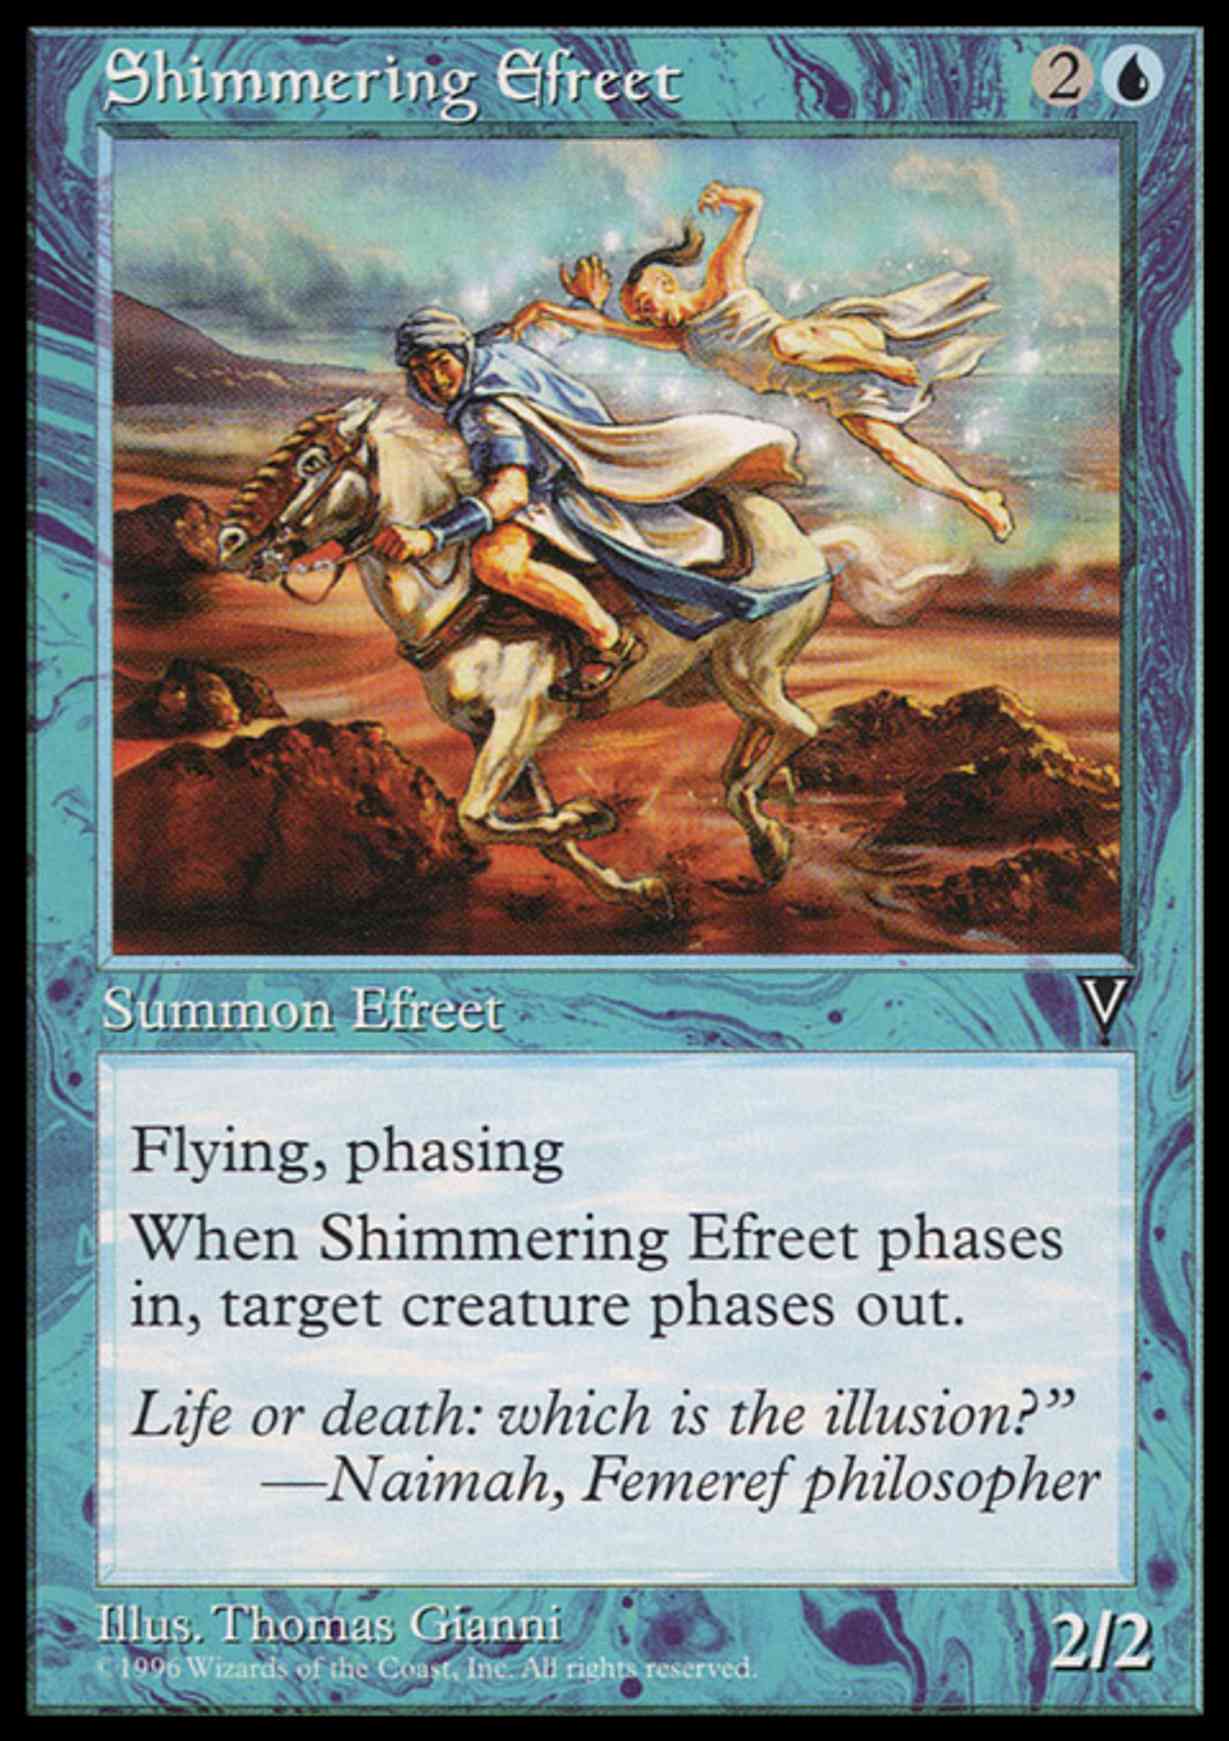 Shimmering Efreet magic card front